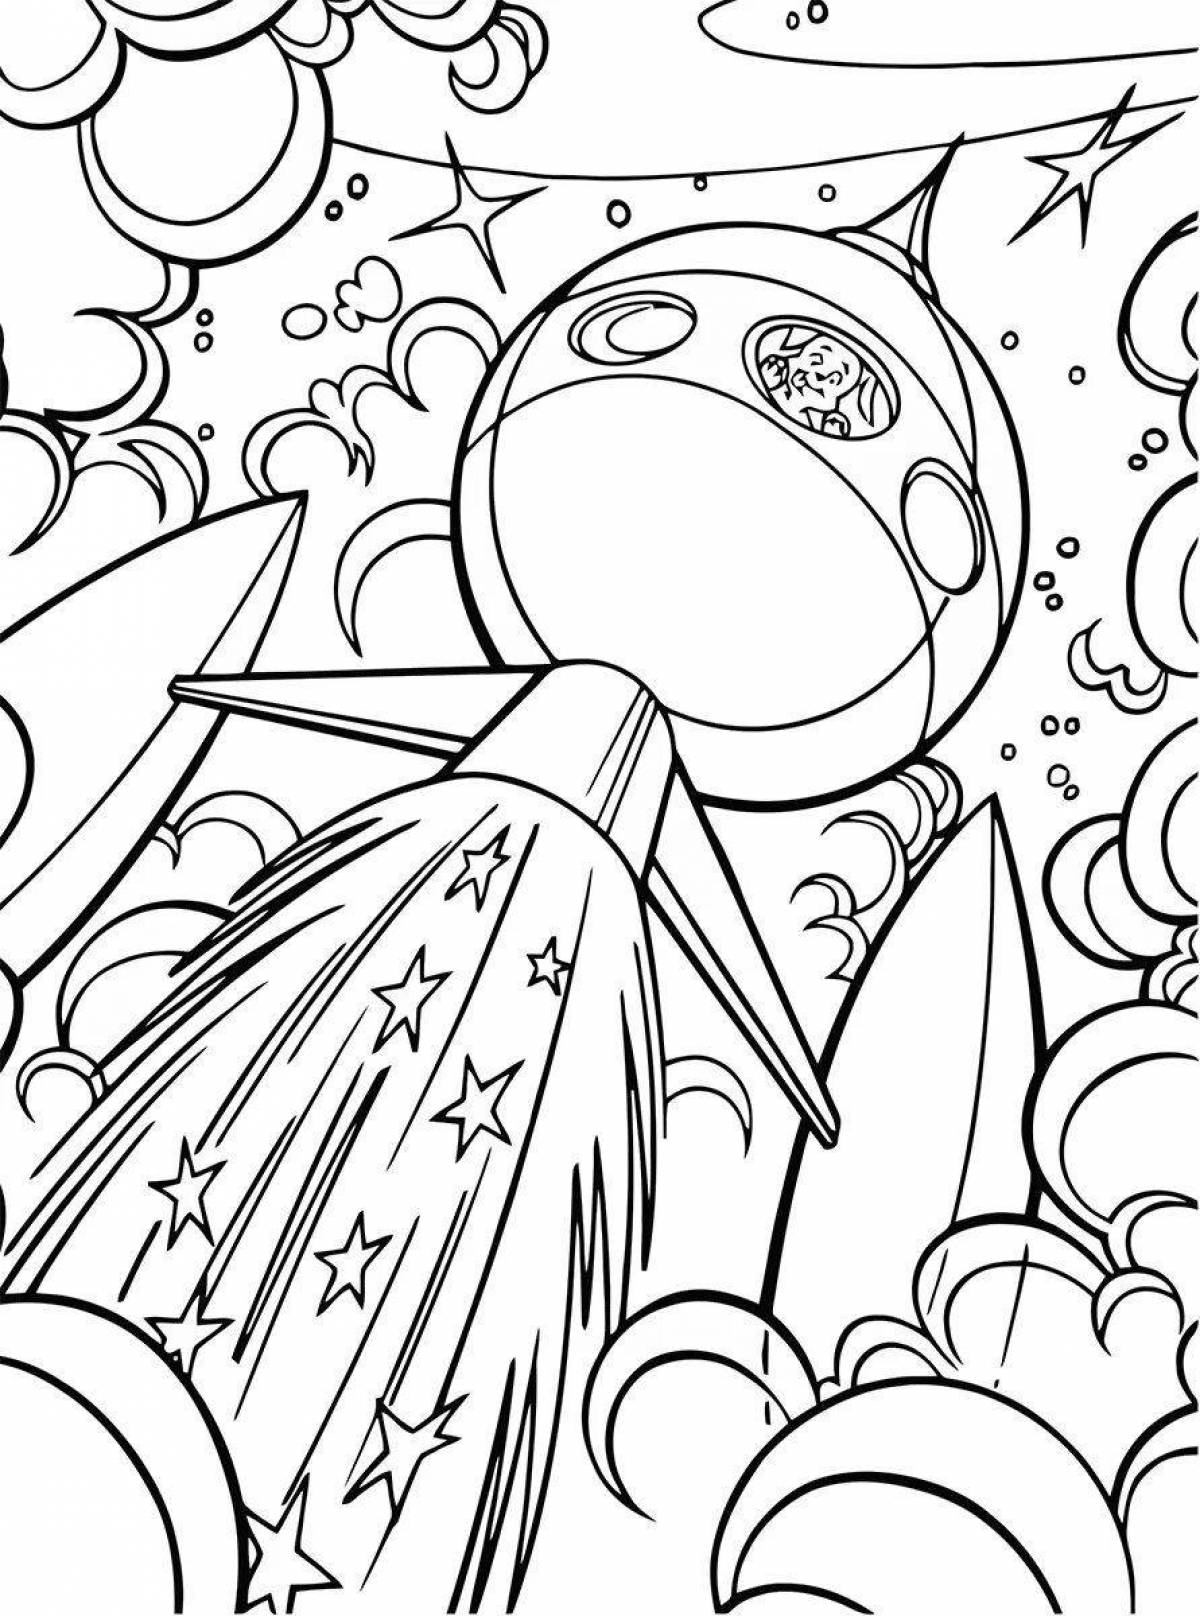 Coloring book shining space